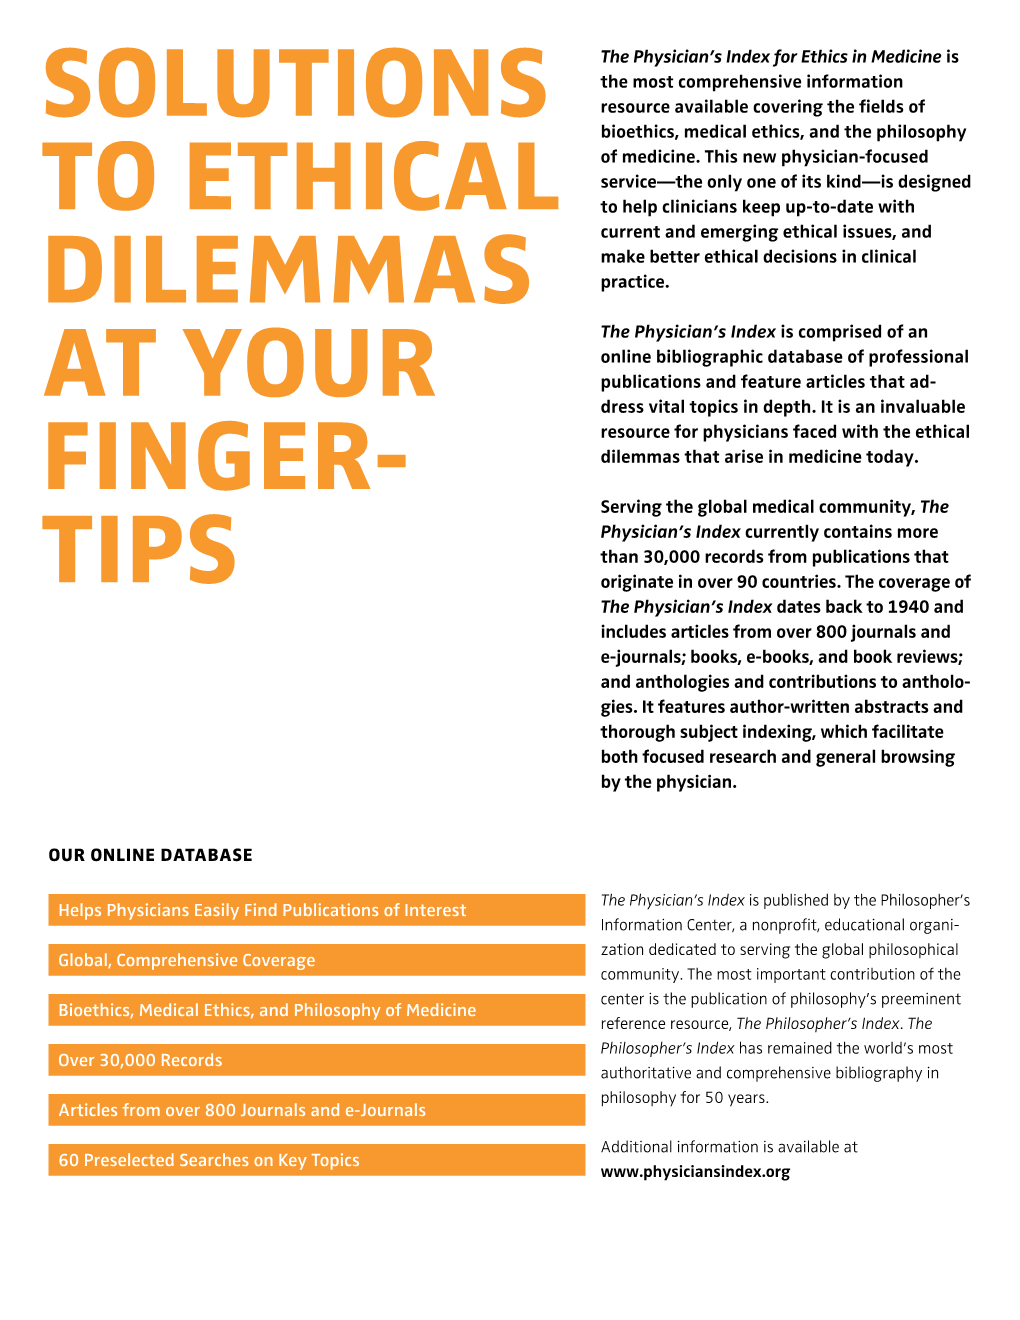 Solutions to Ethical Dilemmas at Your Finger- Tips